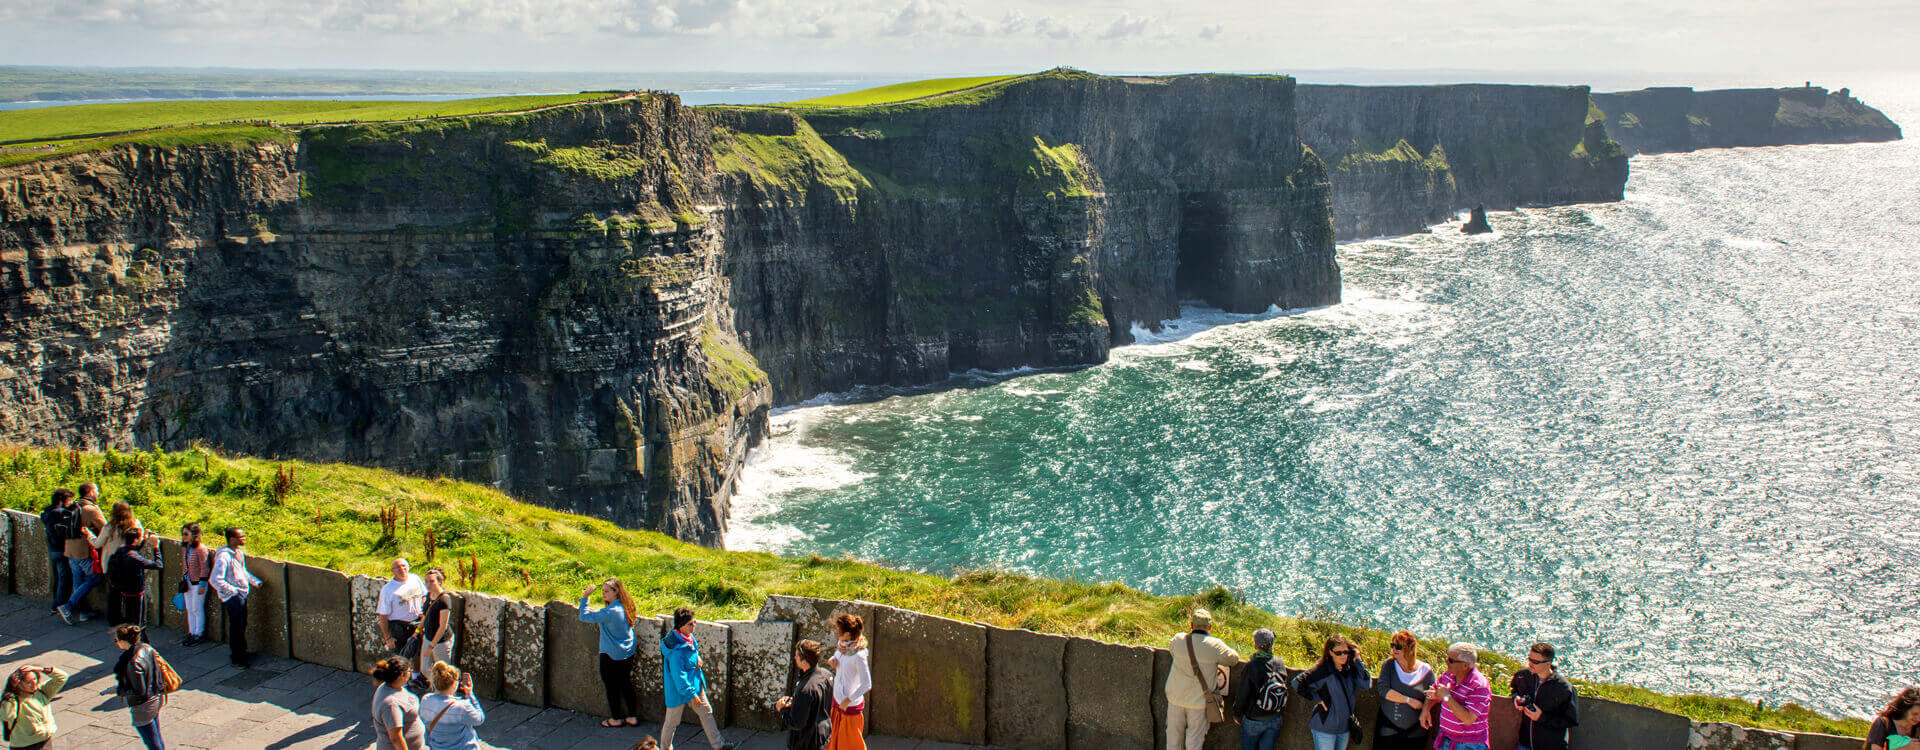 Irish Day Tours To Cliffs Of Moher And Galway